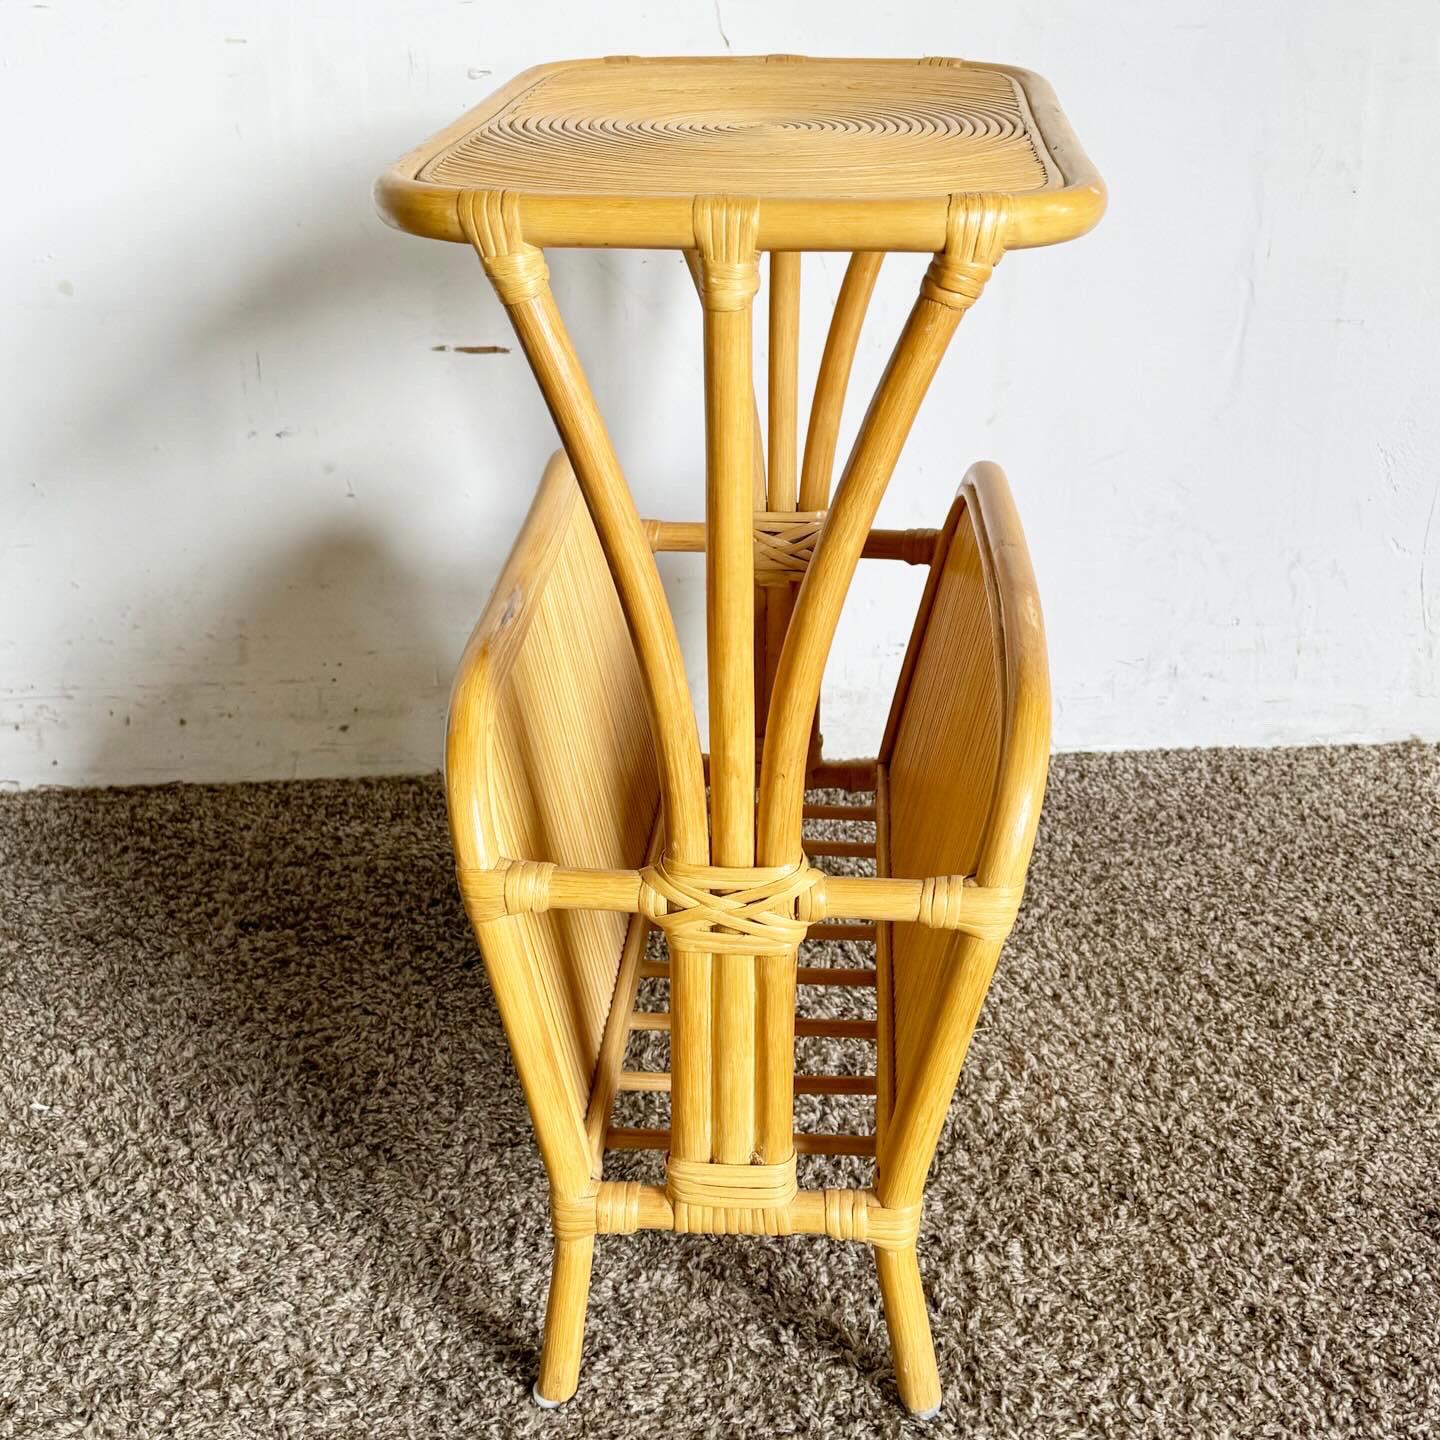 Boho Chic Bamboo Rattan Pencil Reed Swirl Side Table/Magazine Rack For Sale 3